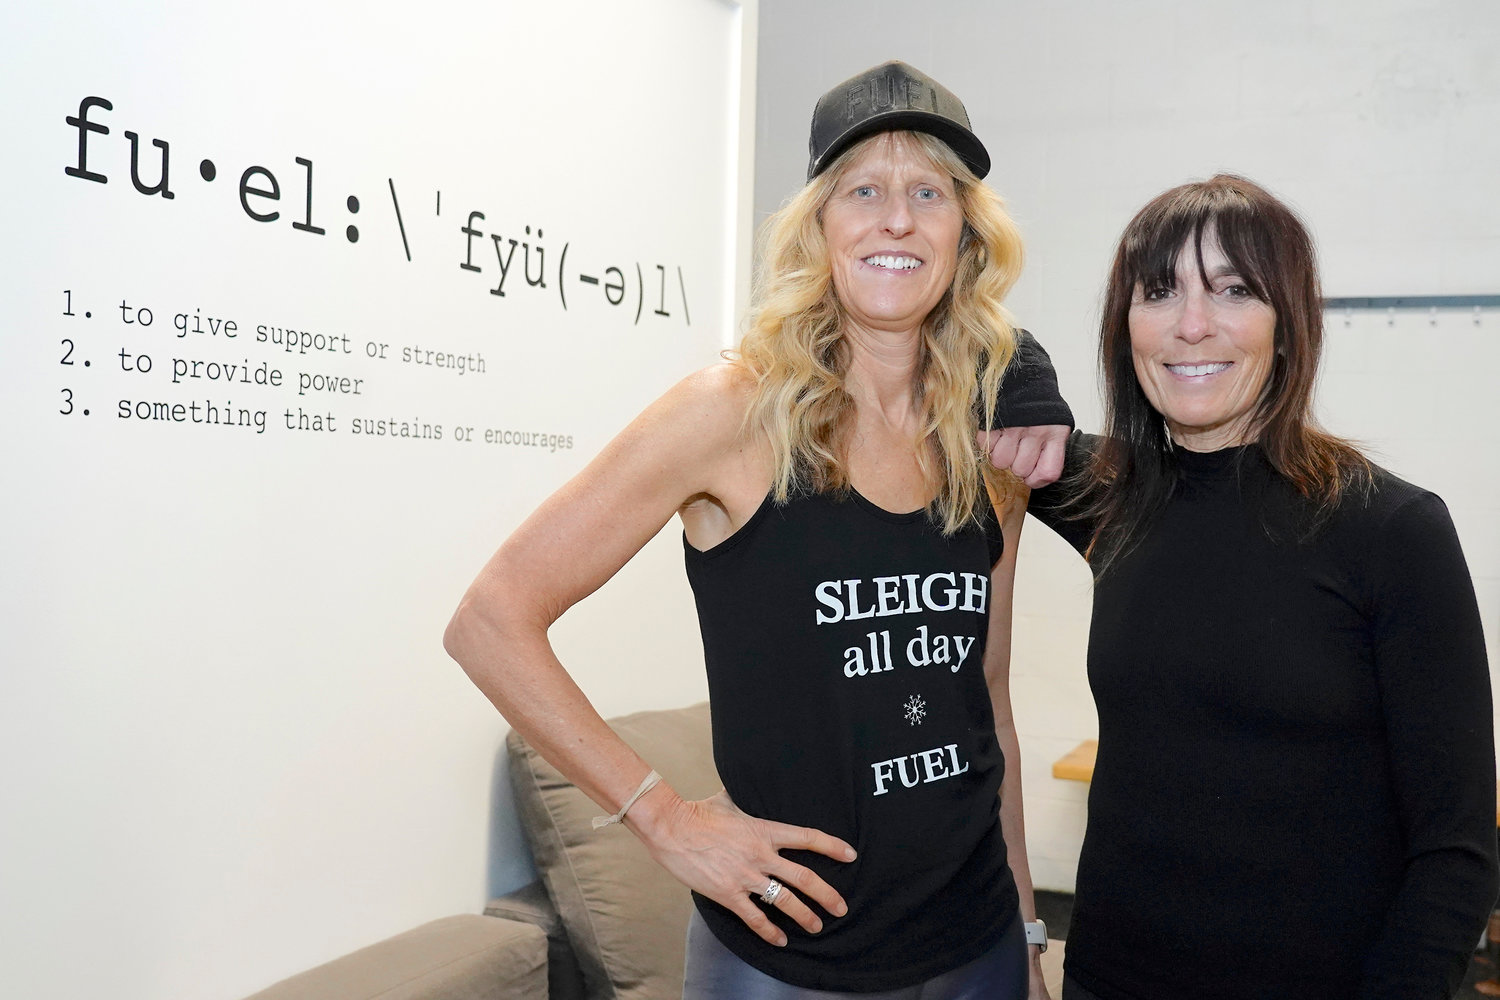 Fuel Training Studio owners Julie Bokat, left, and Jeanne Carter pose for a photo inside their gym, Thursday, Jan. 19, in Newburyport, Mass.